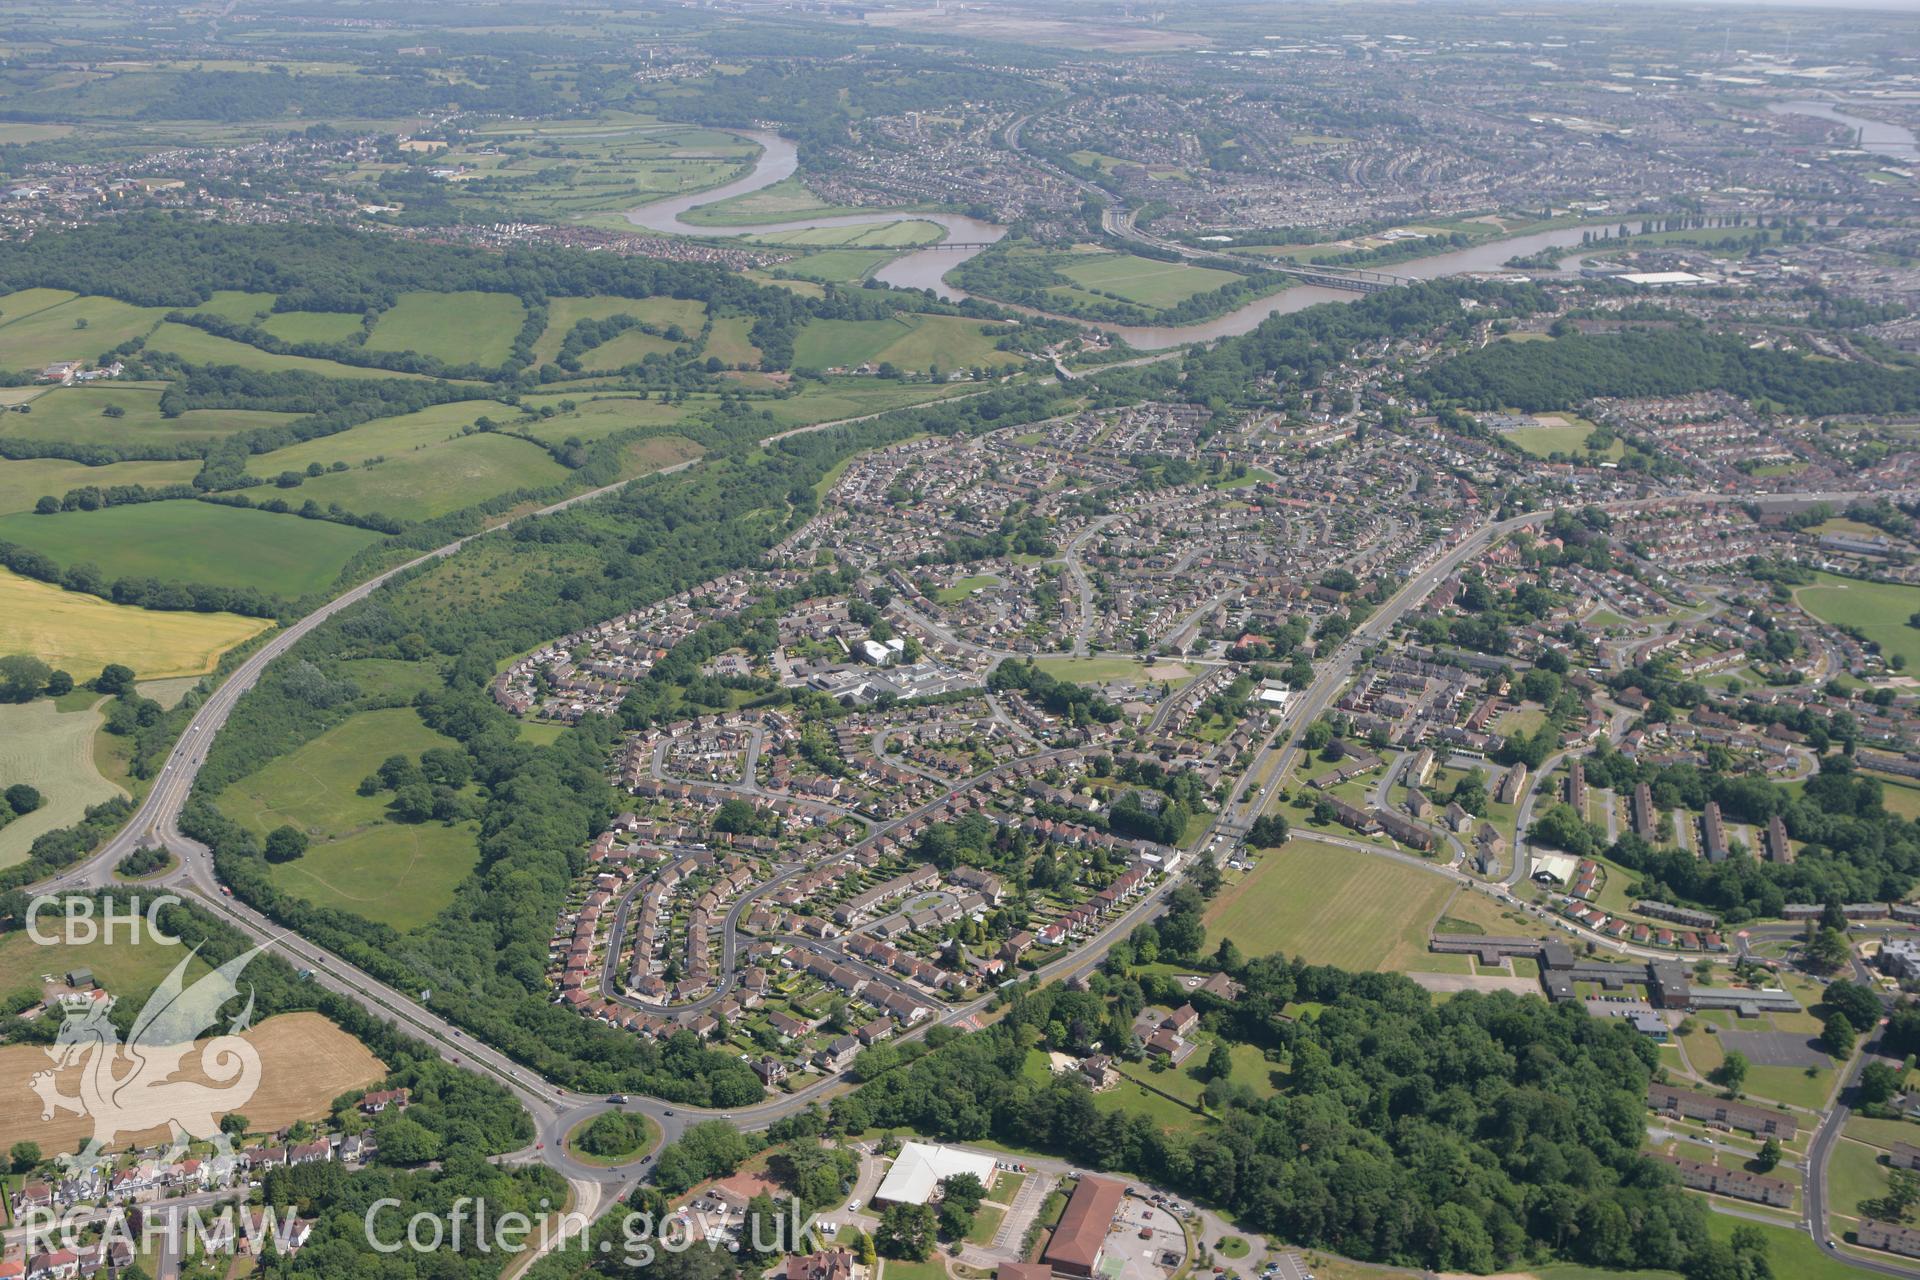 RCAHMW colour oblique photograph of Malpas, Newport, from the north-west. Taken by Toby Driver on 21/06/2010.